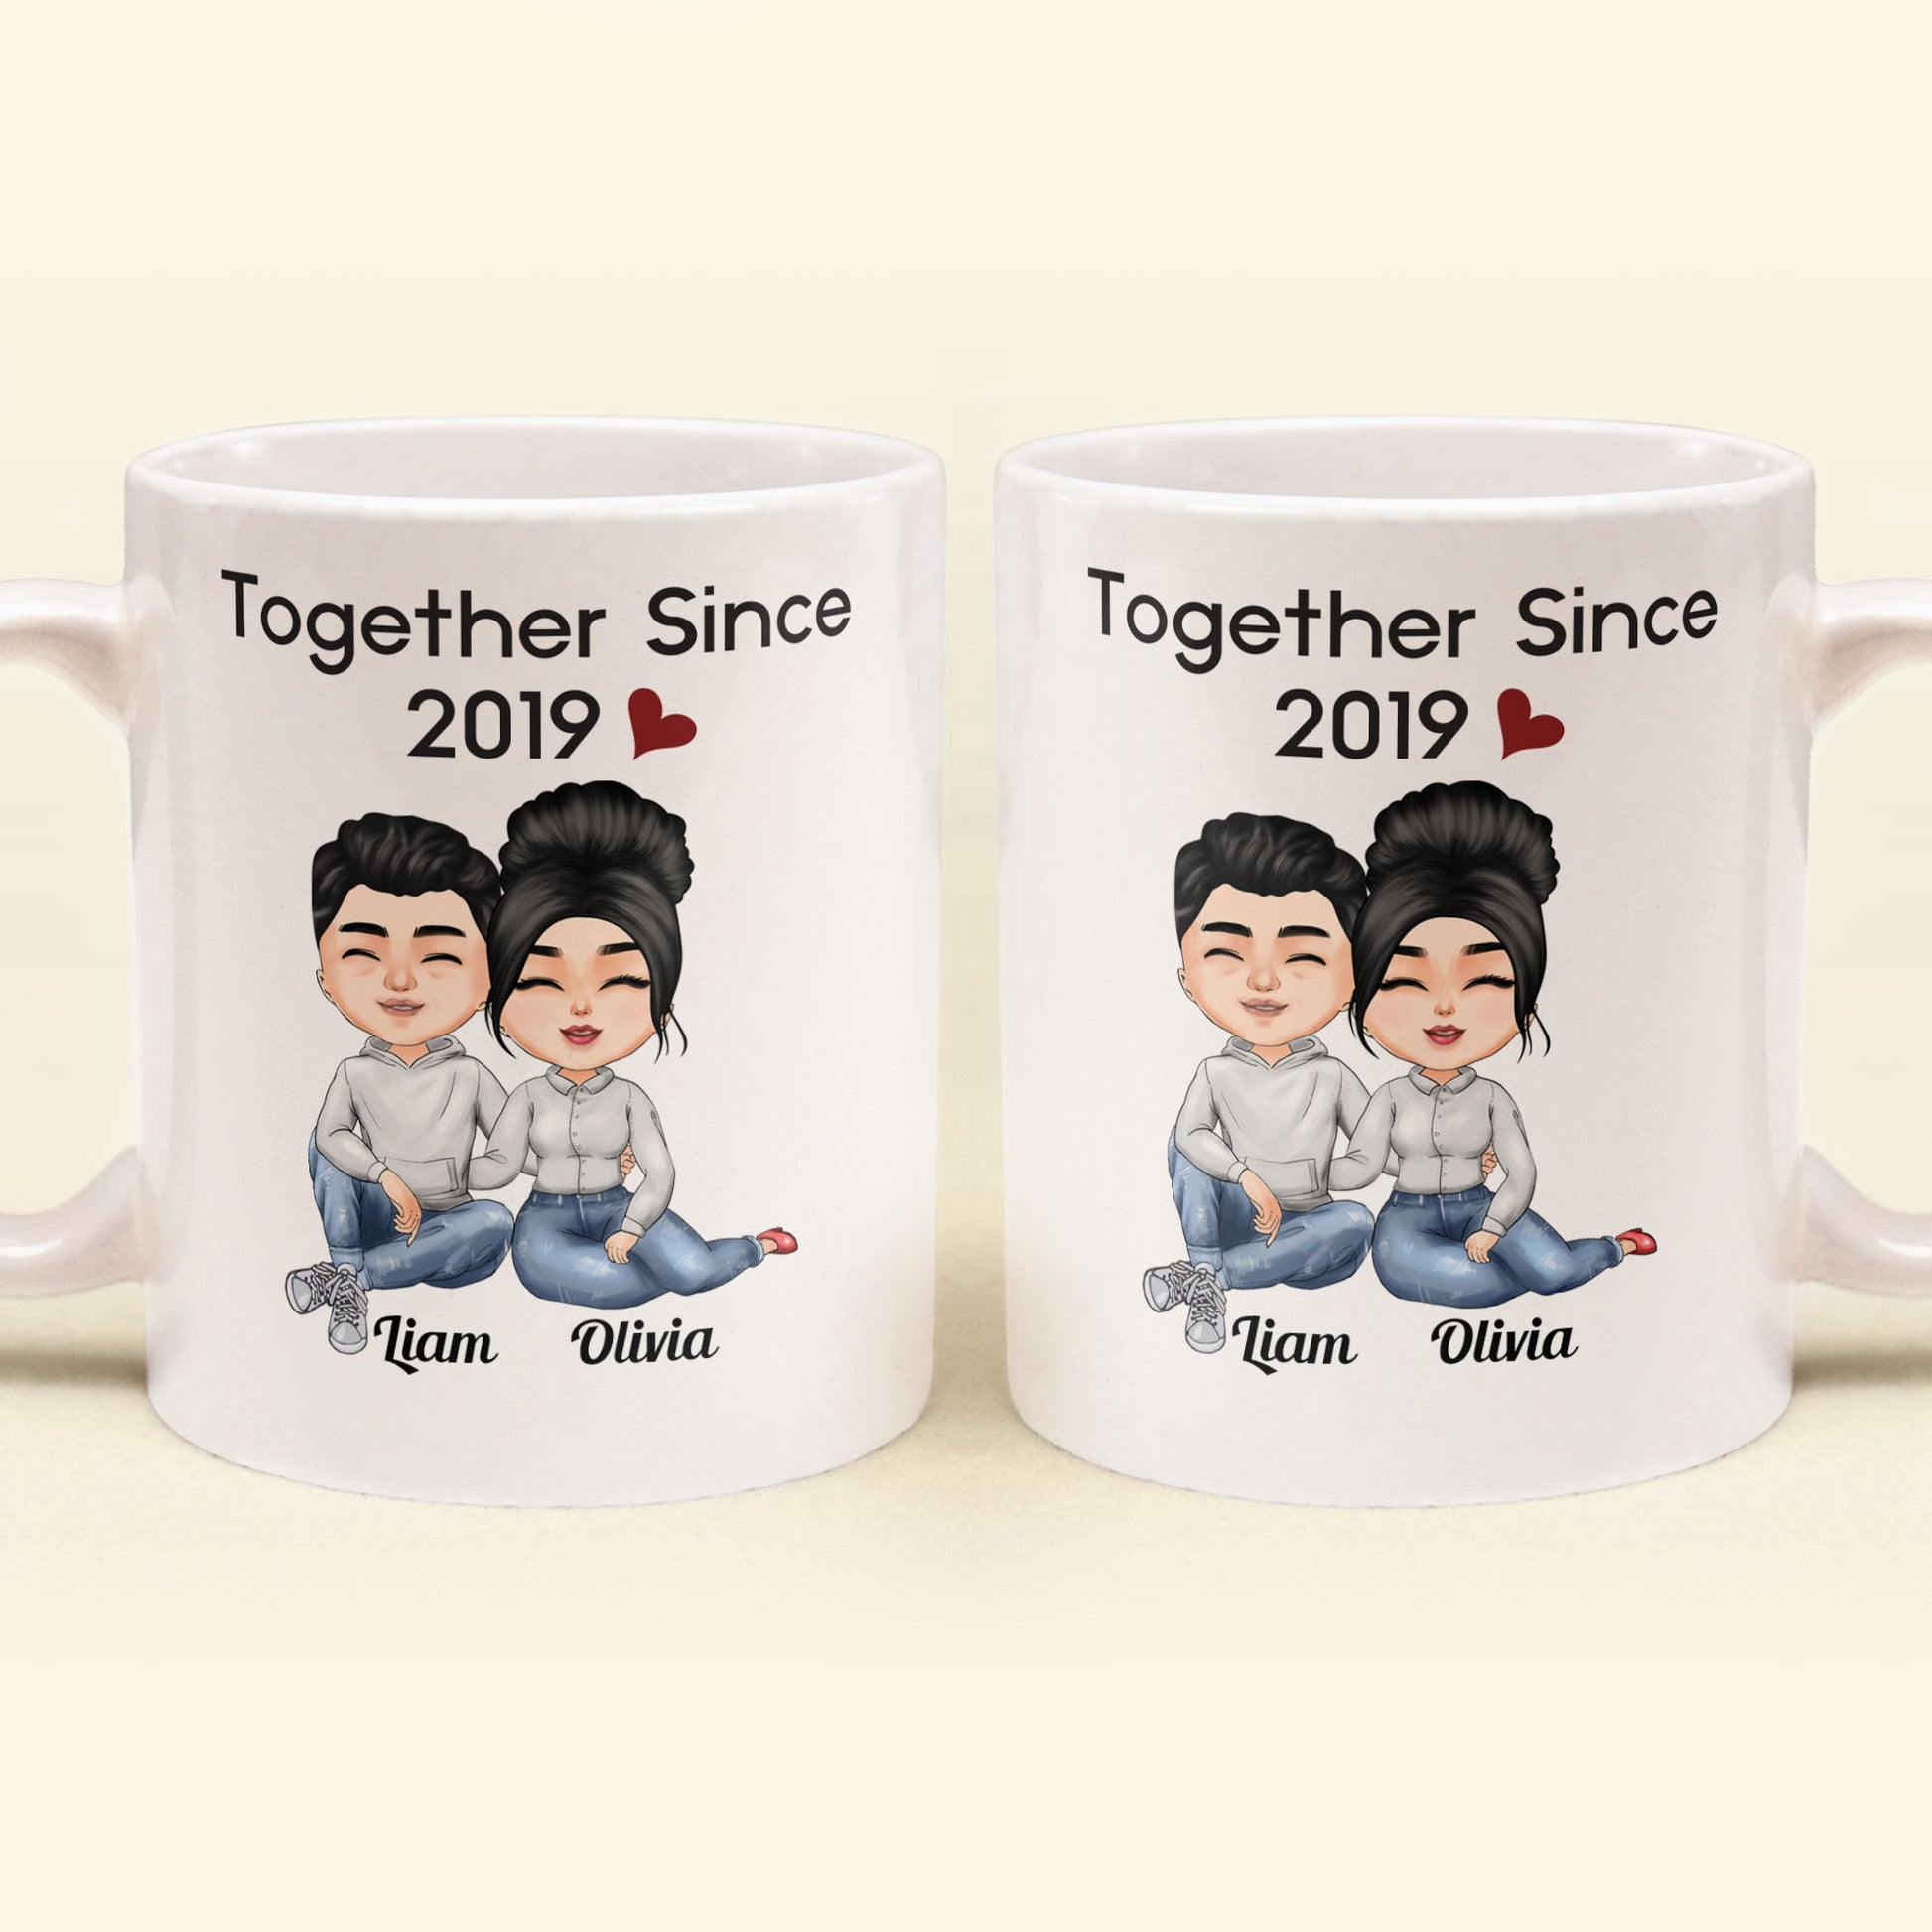 Together Since - Personalized Mug - Anniversary, Valentine's Day Gift For Spouse, Husband, Wife, Lovers, Girlfriend, Boyfriend